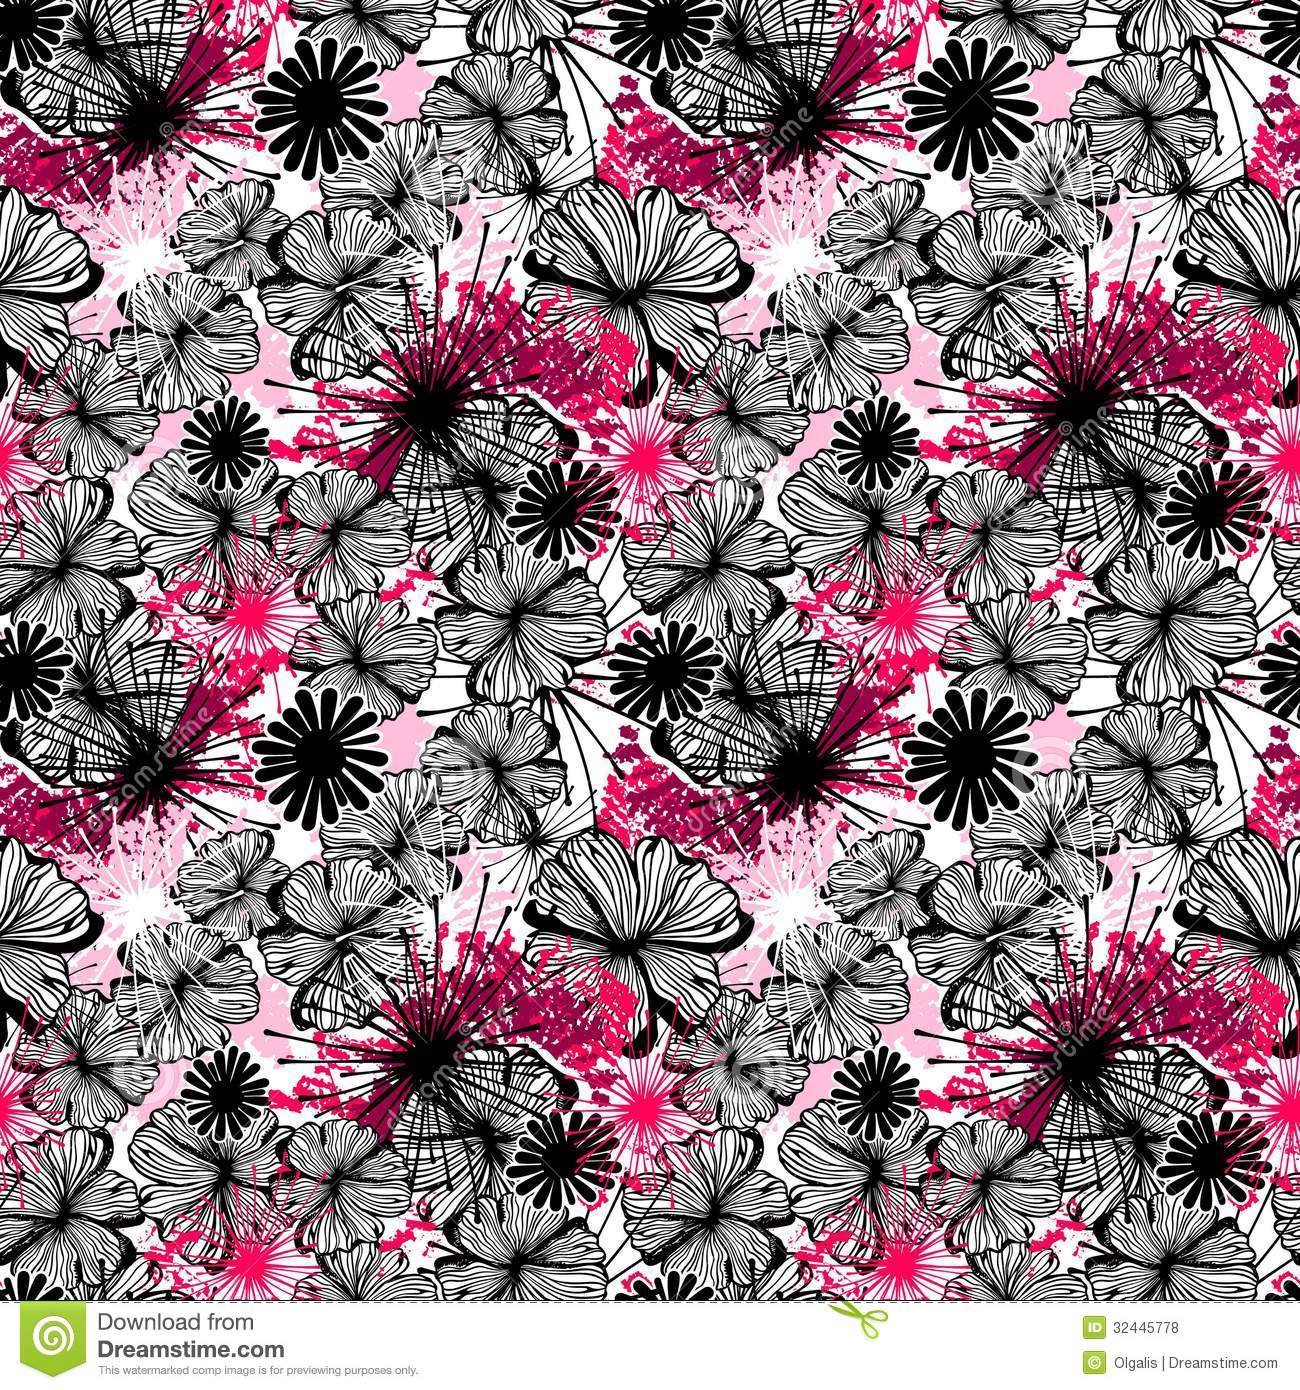 Doodle Seamless Flower Ink Pattern Royalty Free Stock Photos   Image